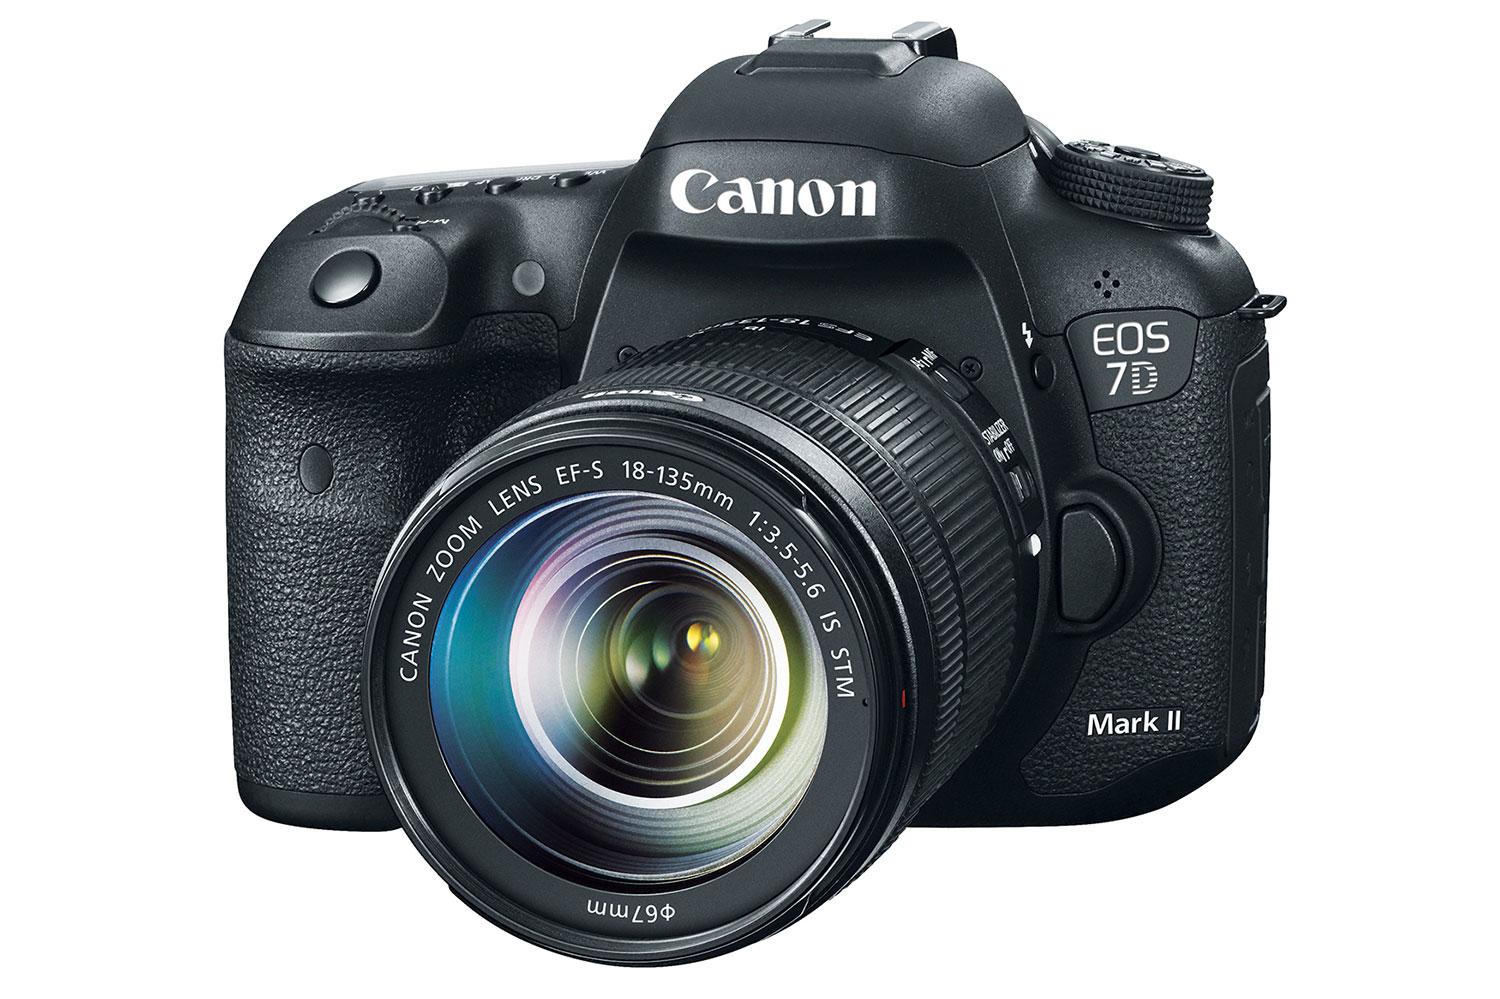 hands on review canon eos 7d mark ii front angled press image